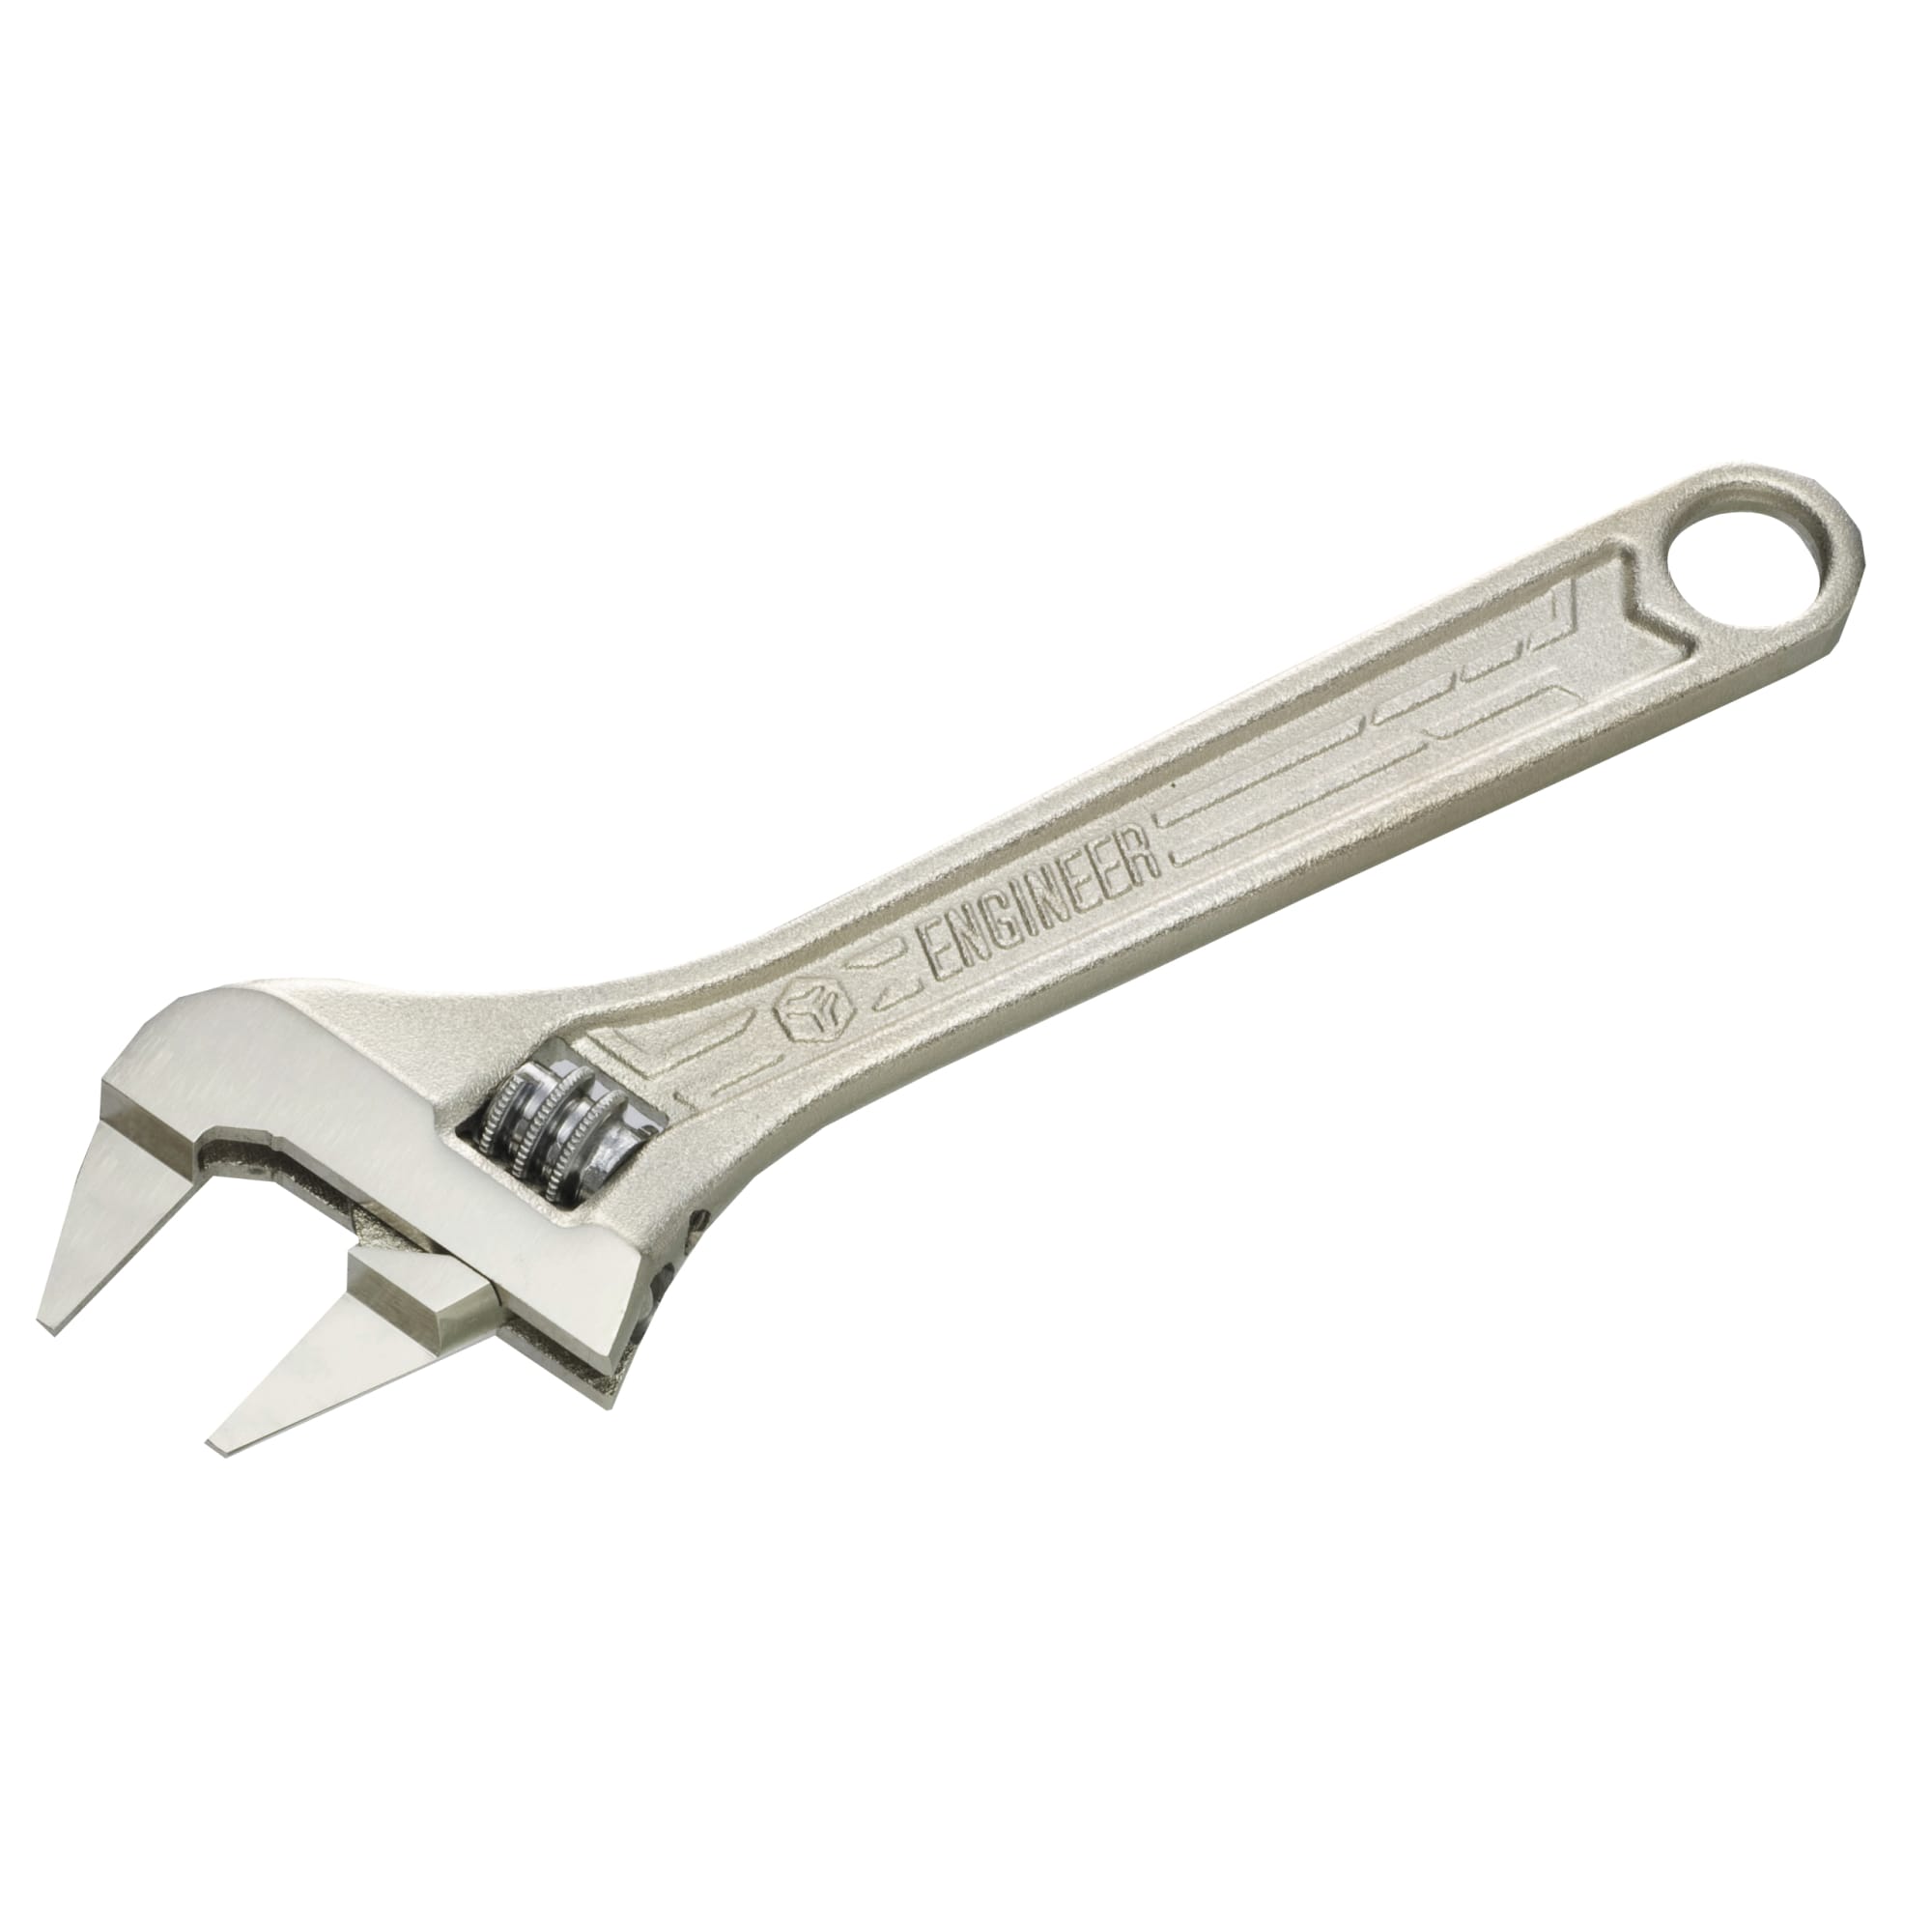 ENGINEER TWM-07 Super Thin Jaws Adjustable Wrench Smart Monkey Wrench